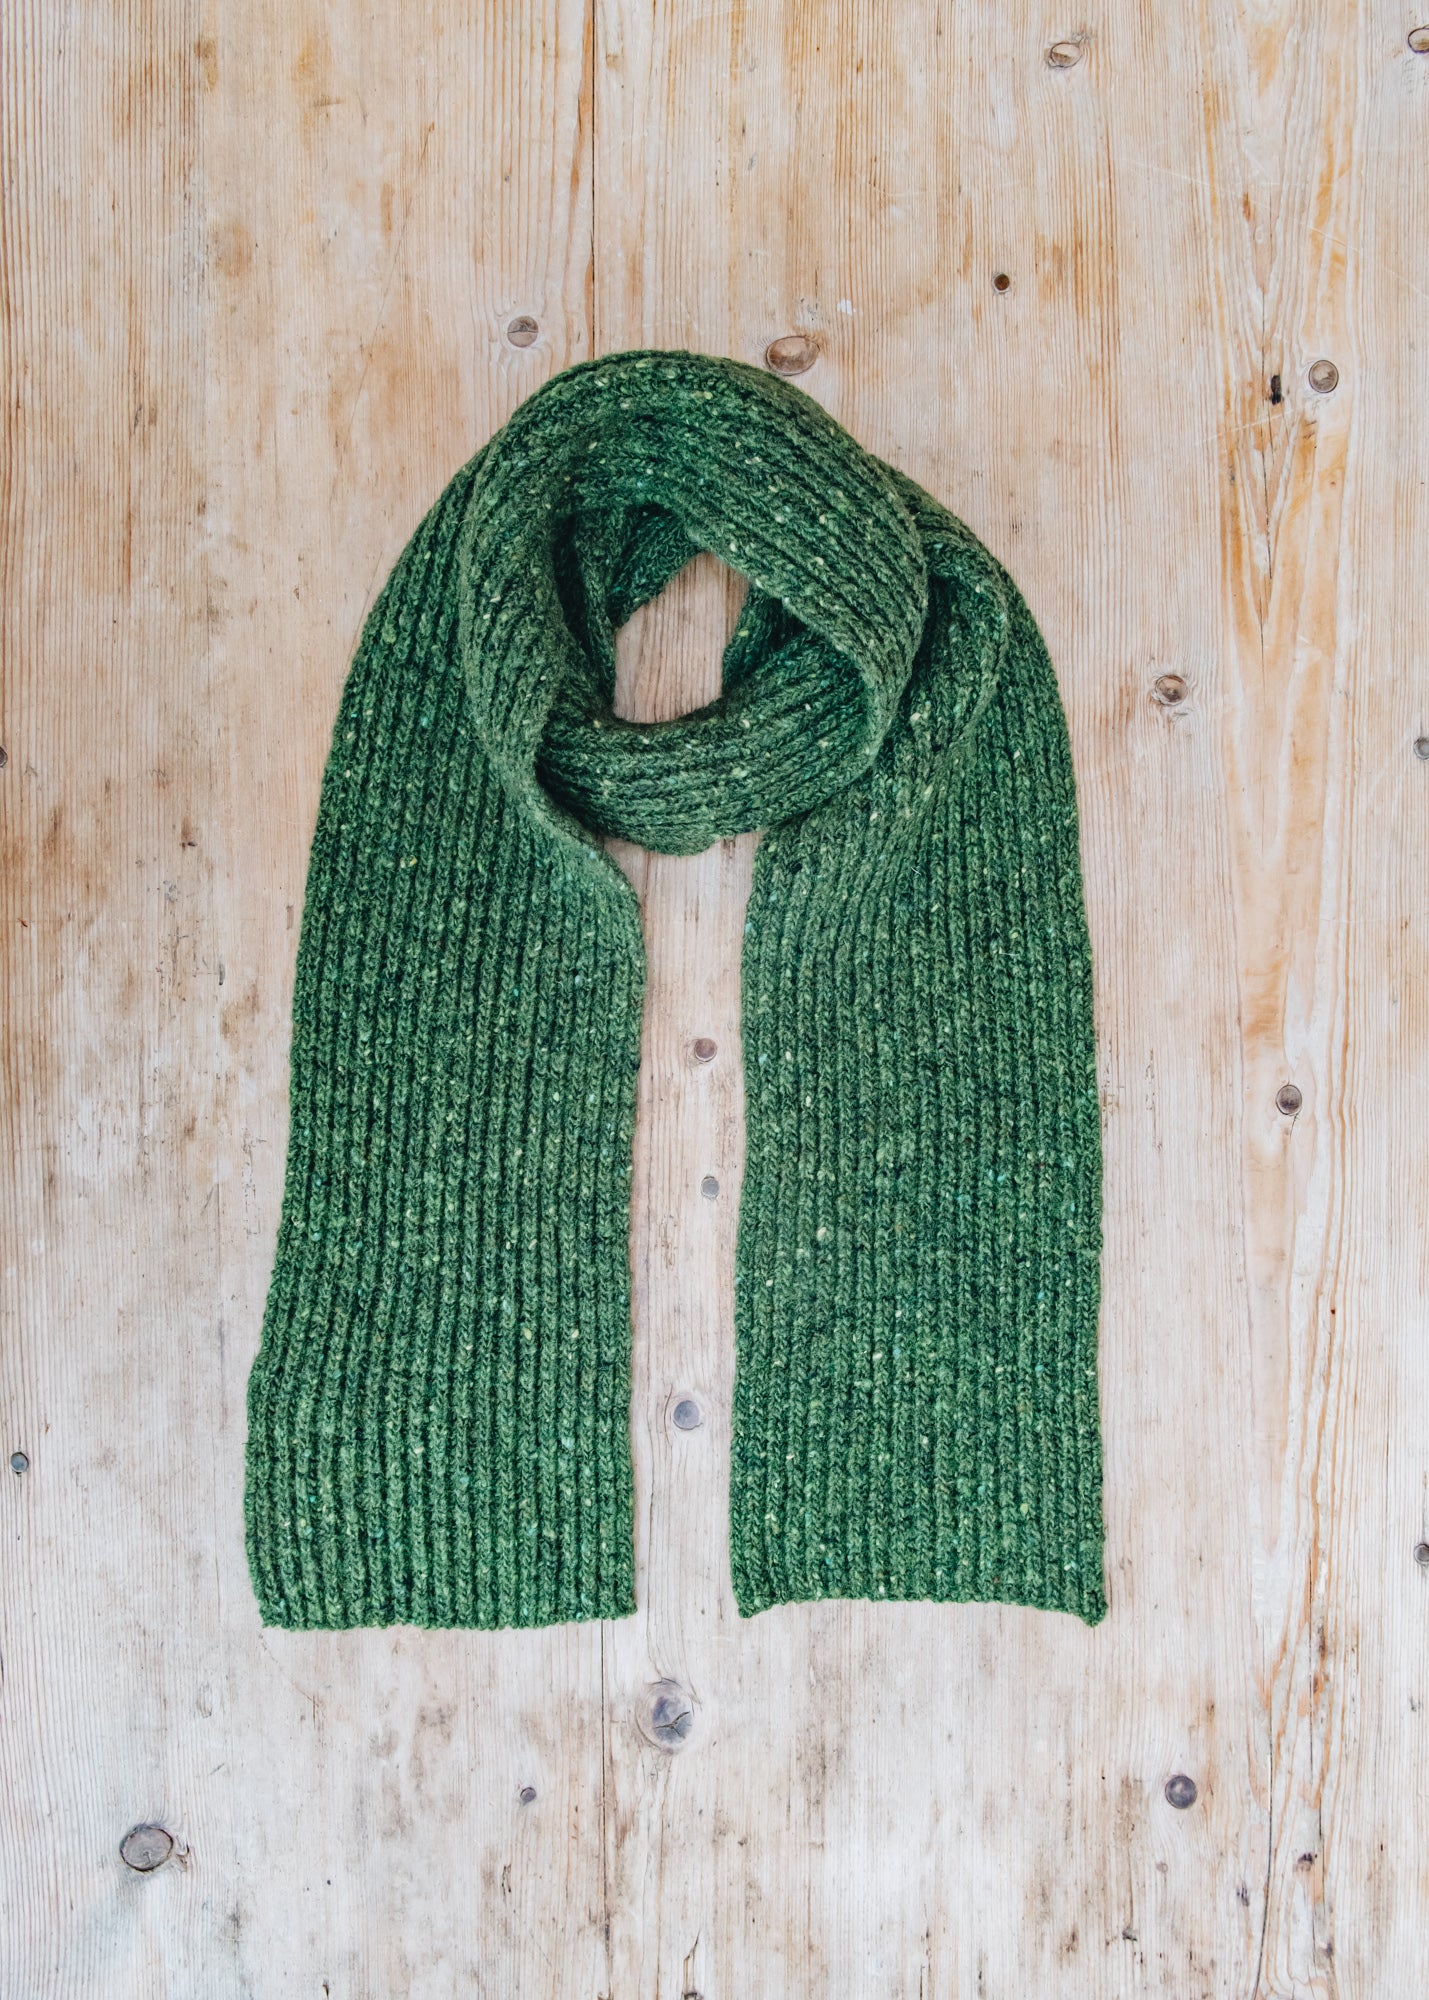 Donegal Narrow Scarf in Green